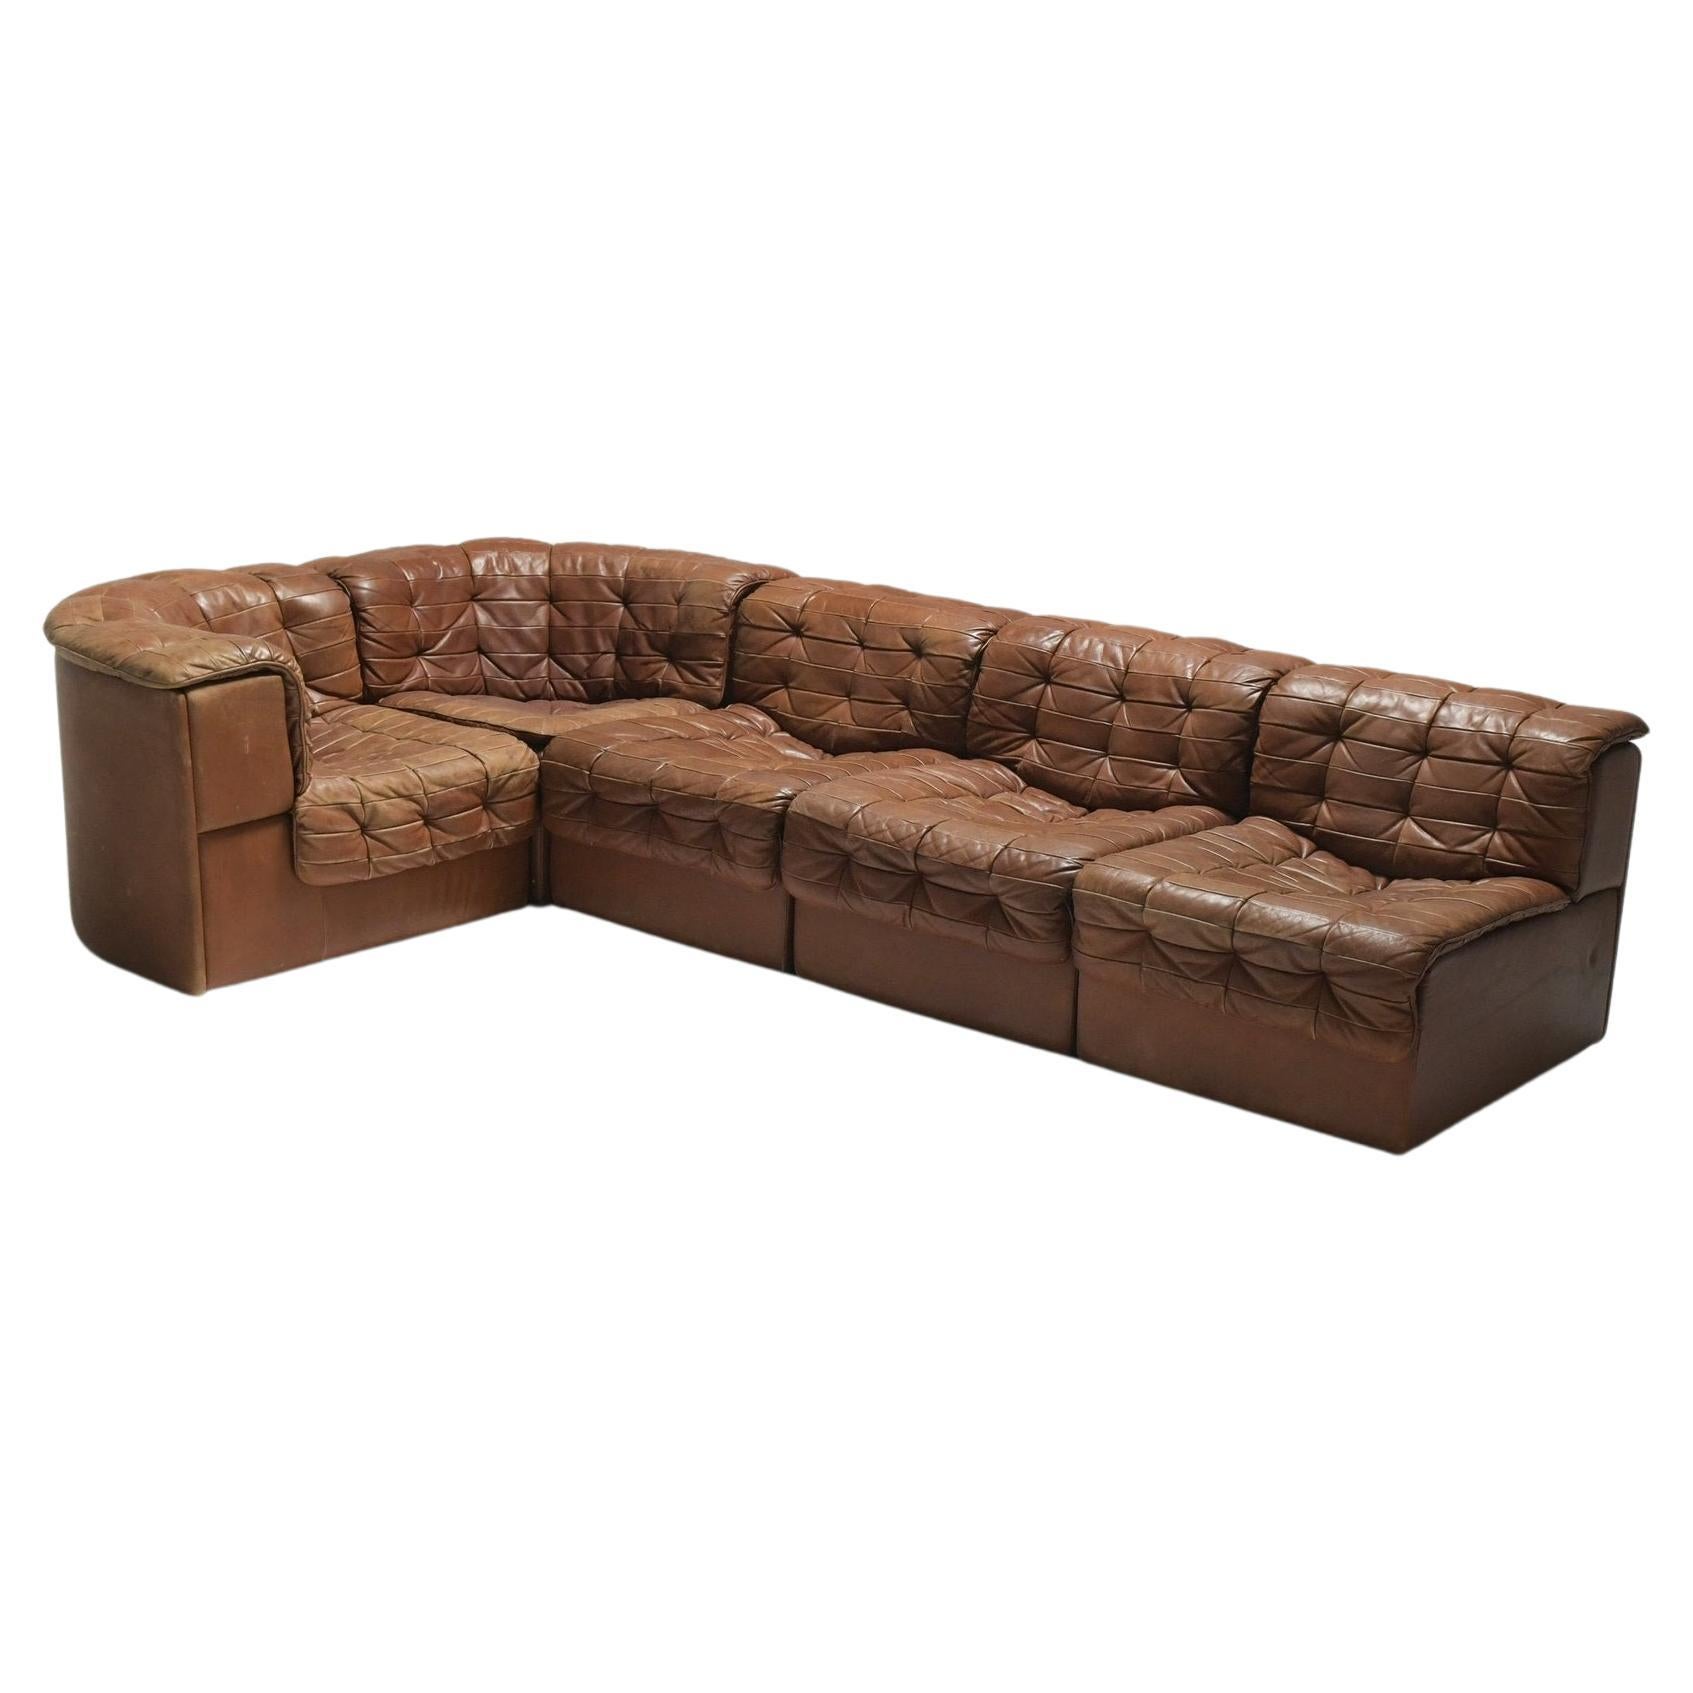 One of the most comfortable sofas ever made. This De Sede 'DS-11' sectional sofa features five pieces including two corner pieces. Switzerland, 1970s. 

It's beyond comfortable. The patinated patchwork leather is in a gorgeous caramel color.

Sold